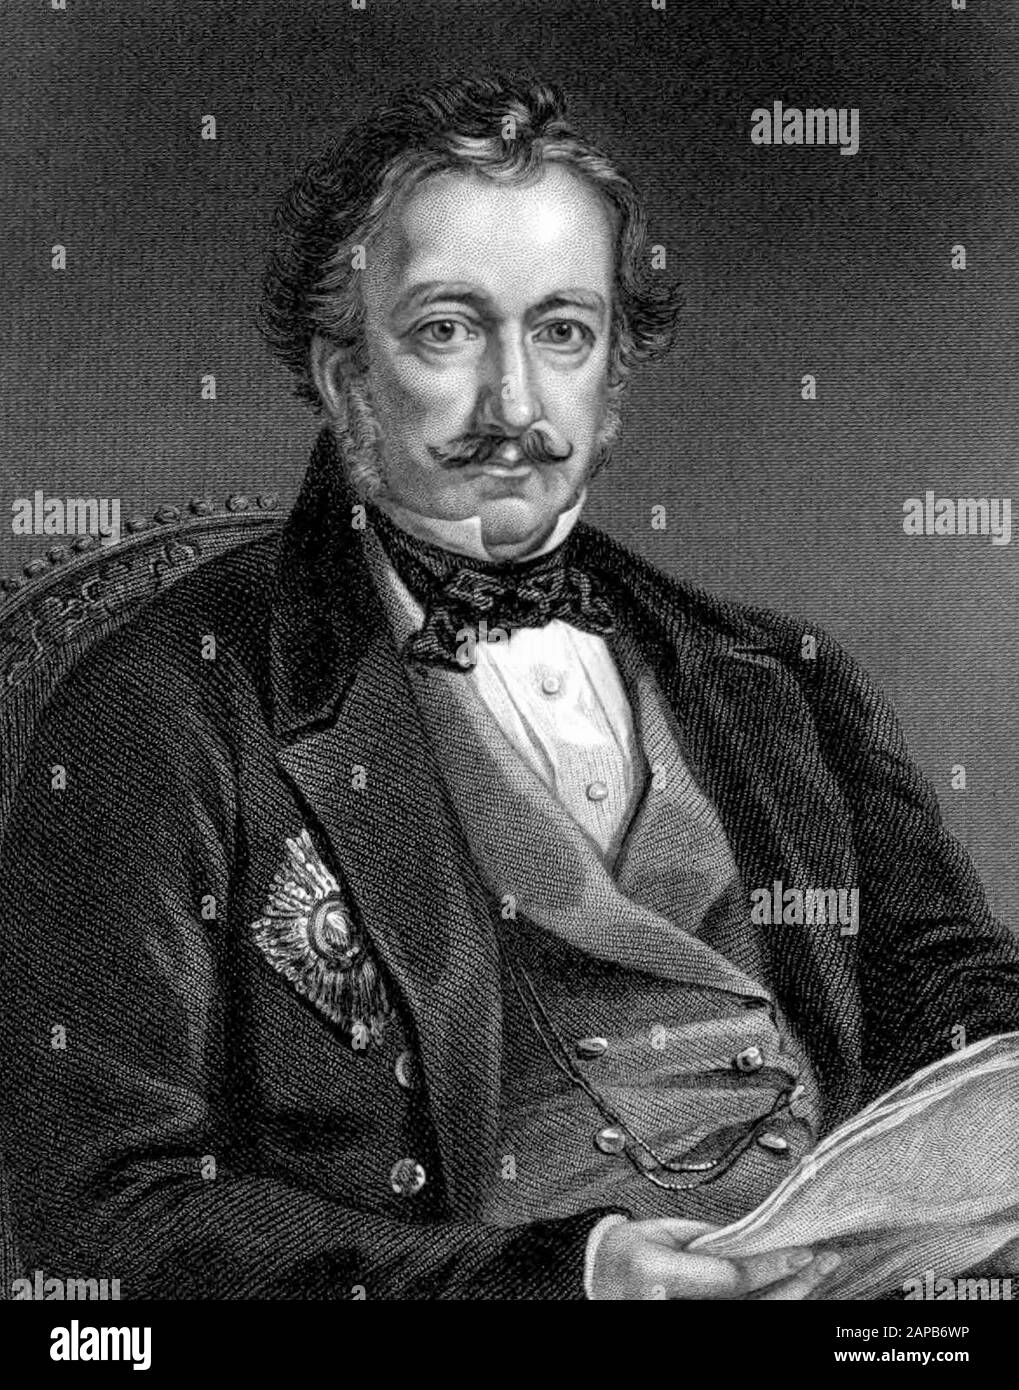 Lieutenant General Sir Henry Pottinger (1789-1856), 1st Baronet, first Governor of Hong Kong, portrait engraving, by E. H. Nolan, 1860 Stock Photo